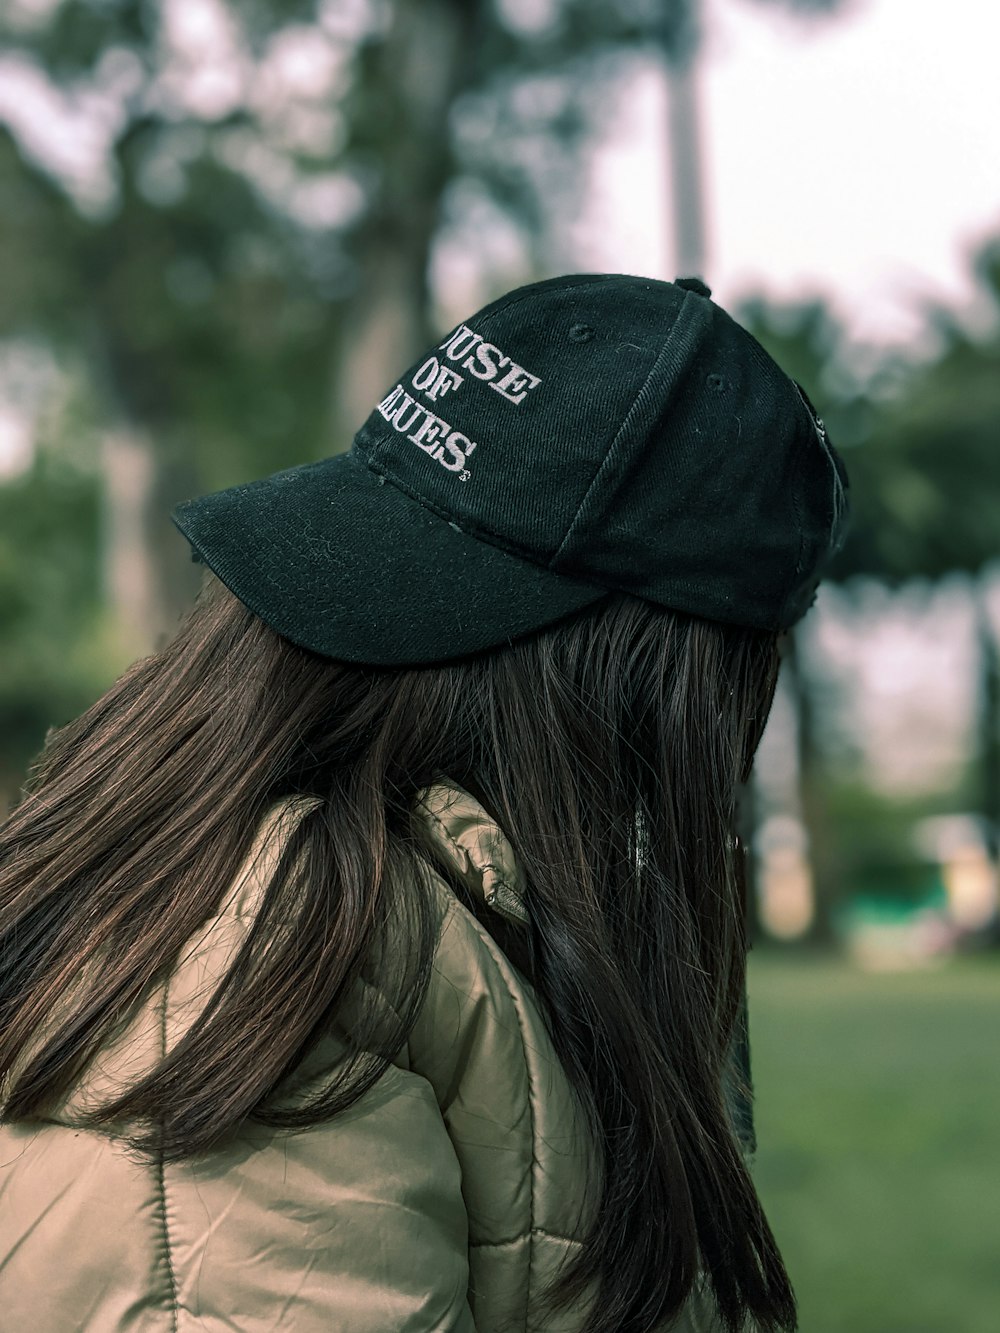 A woman with long hair wearing a hat photo – Free Clothing Image on Unsplash